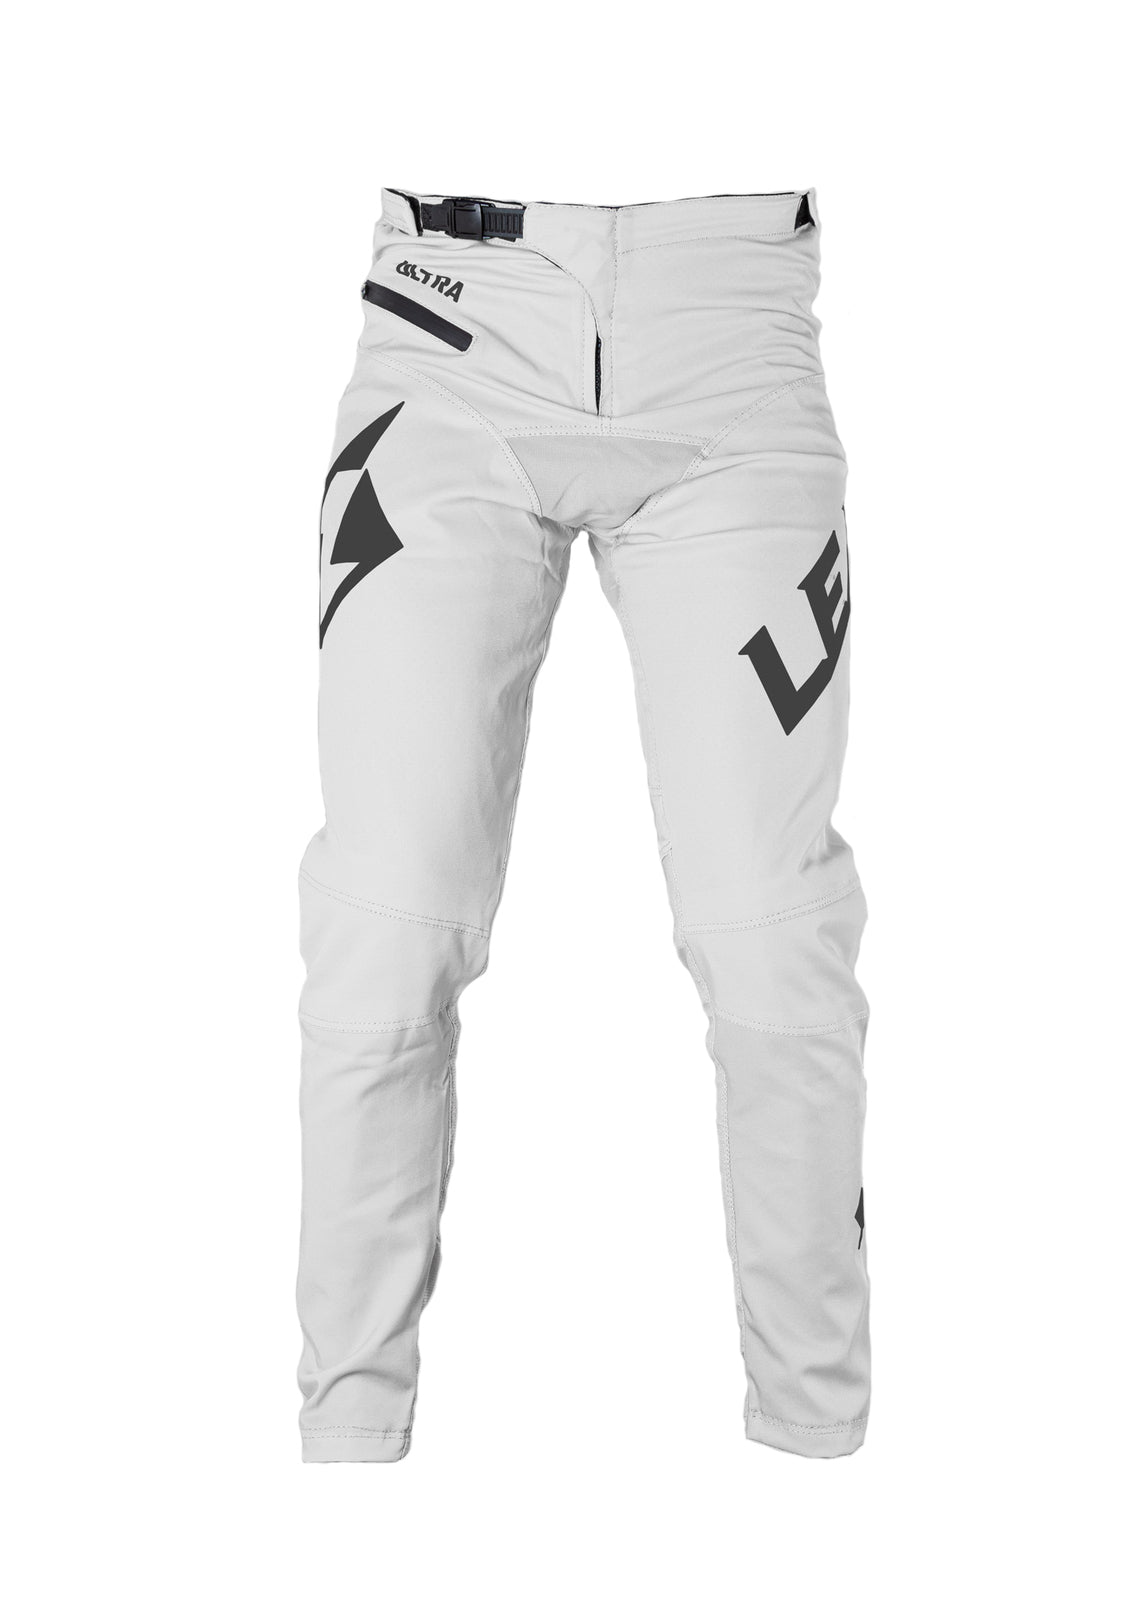 A slim-fit Lead Ultra Pant in white and black, designed for reducing drag.